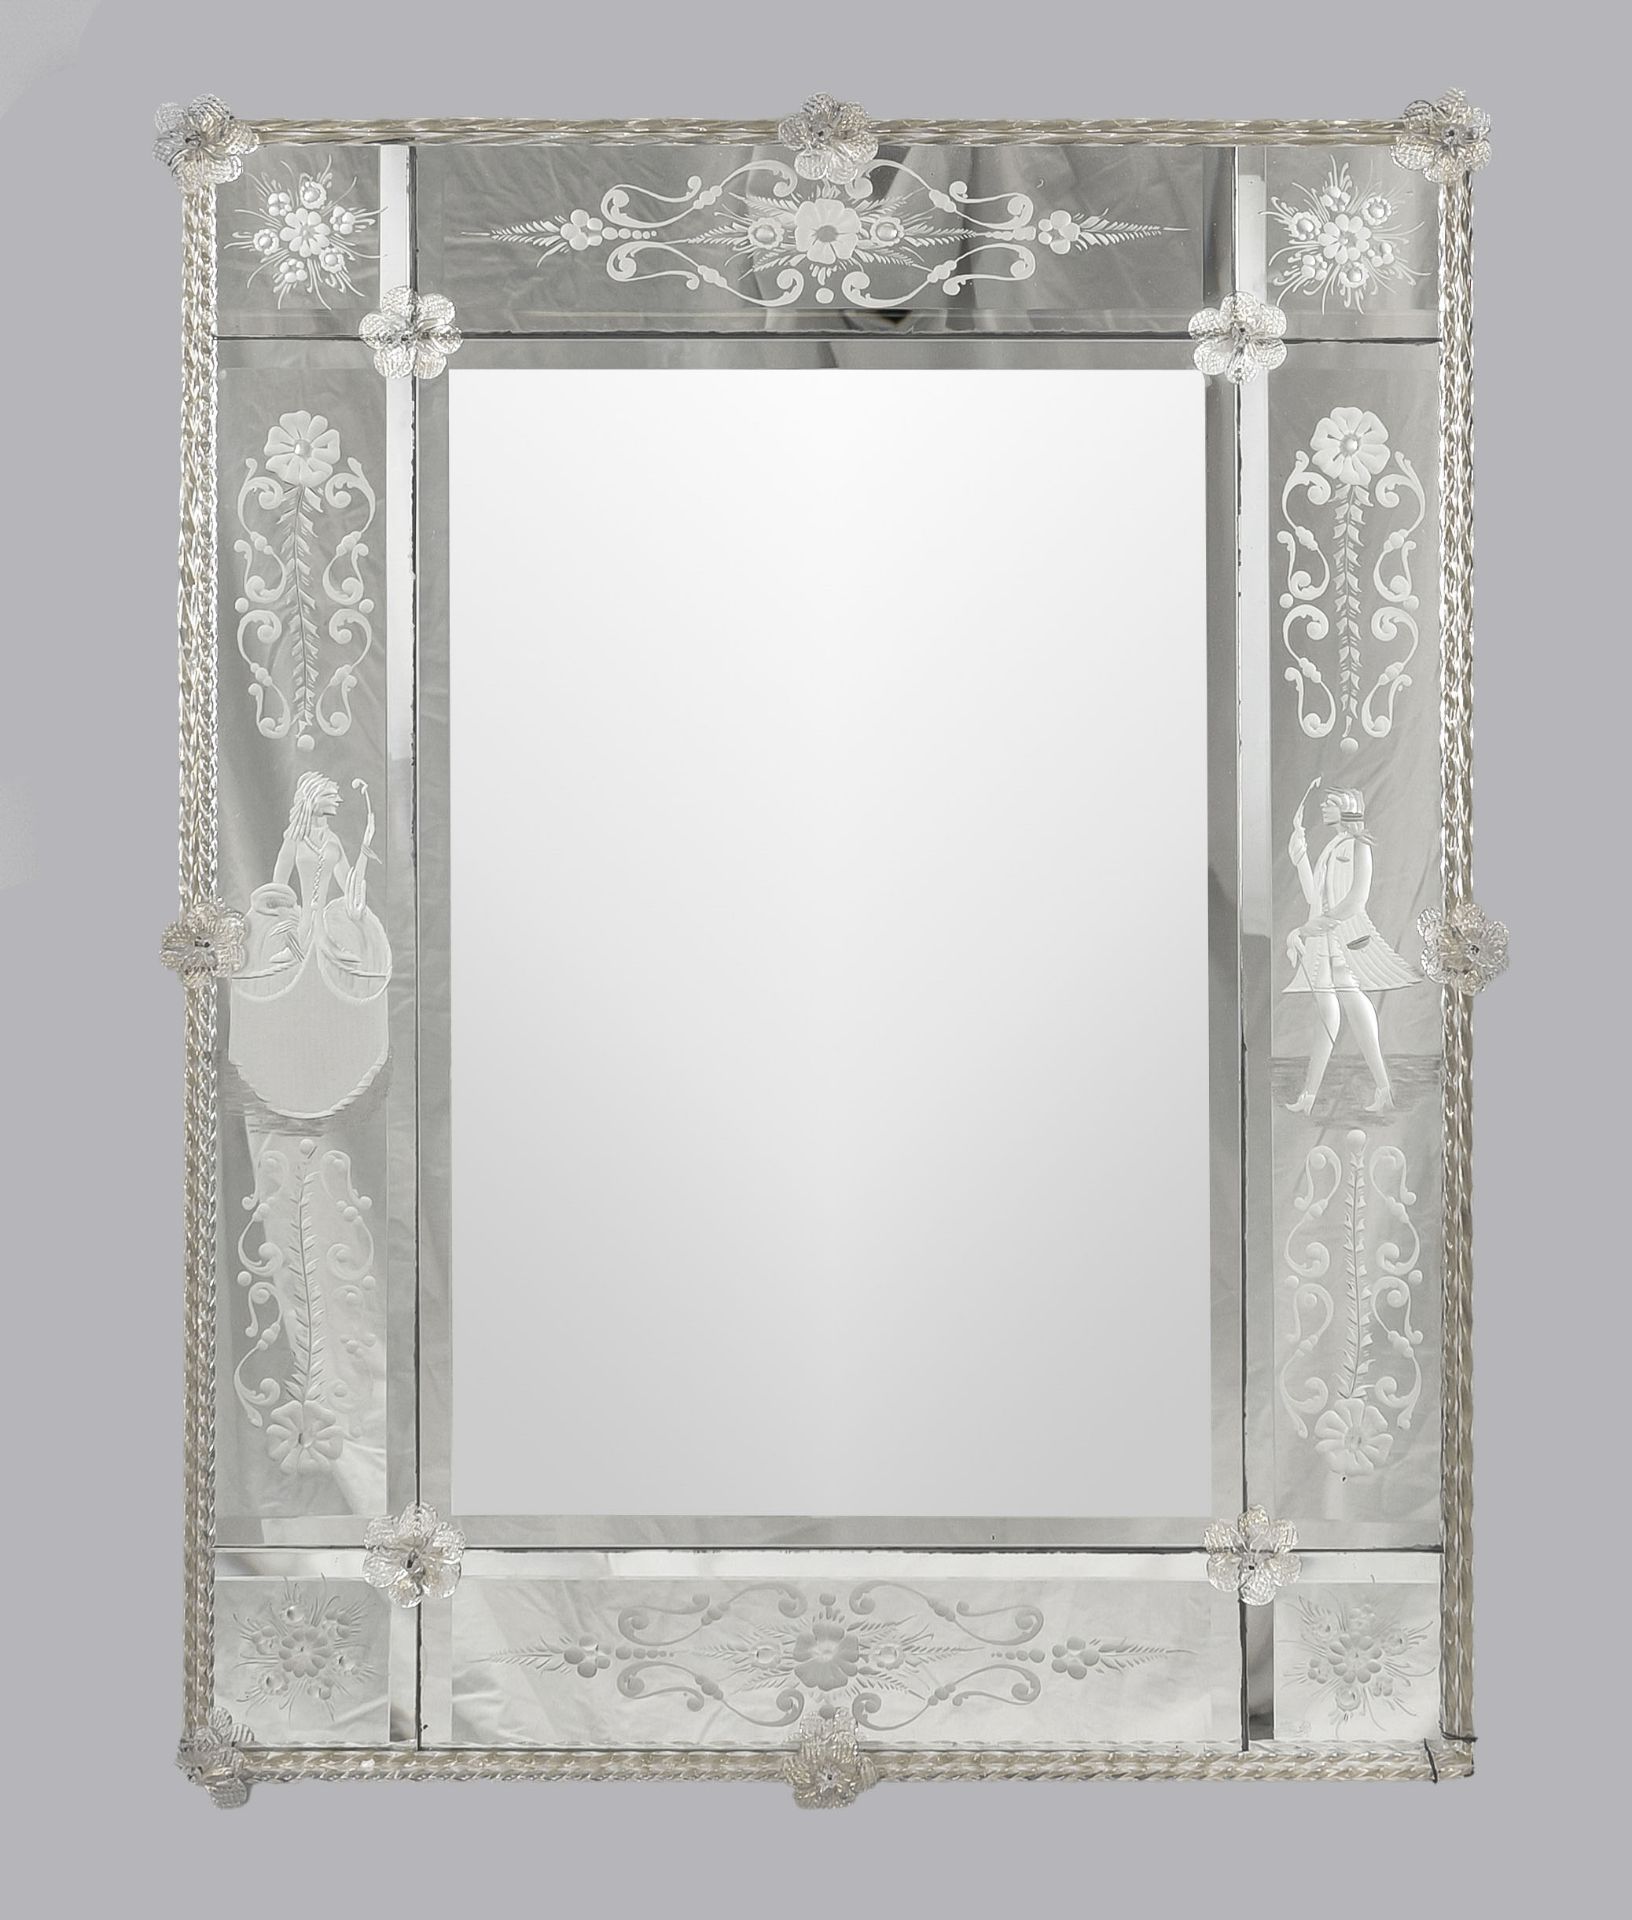 Venetian mirror, Italy 20th century, with applied decorative rods and flowers. Ornamental and